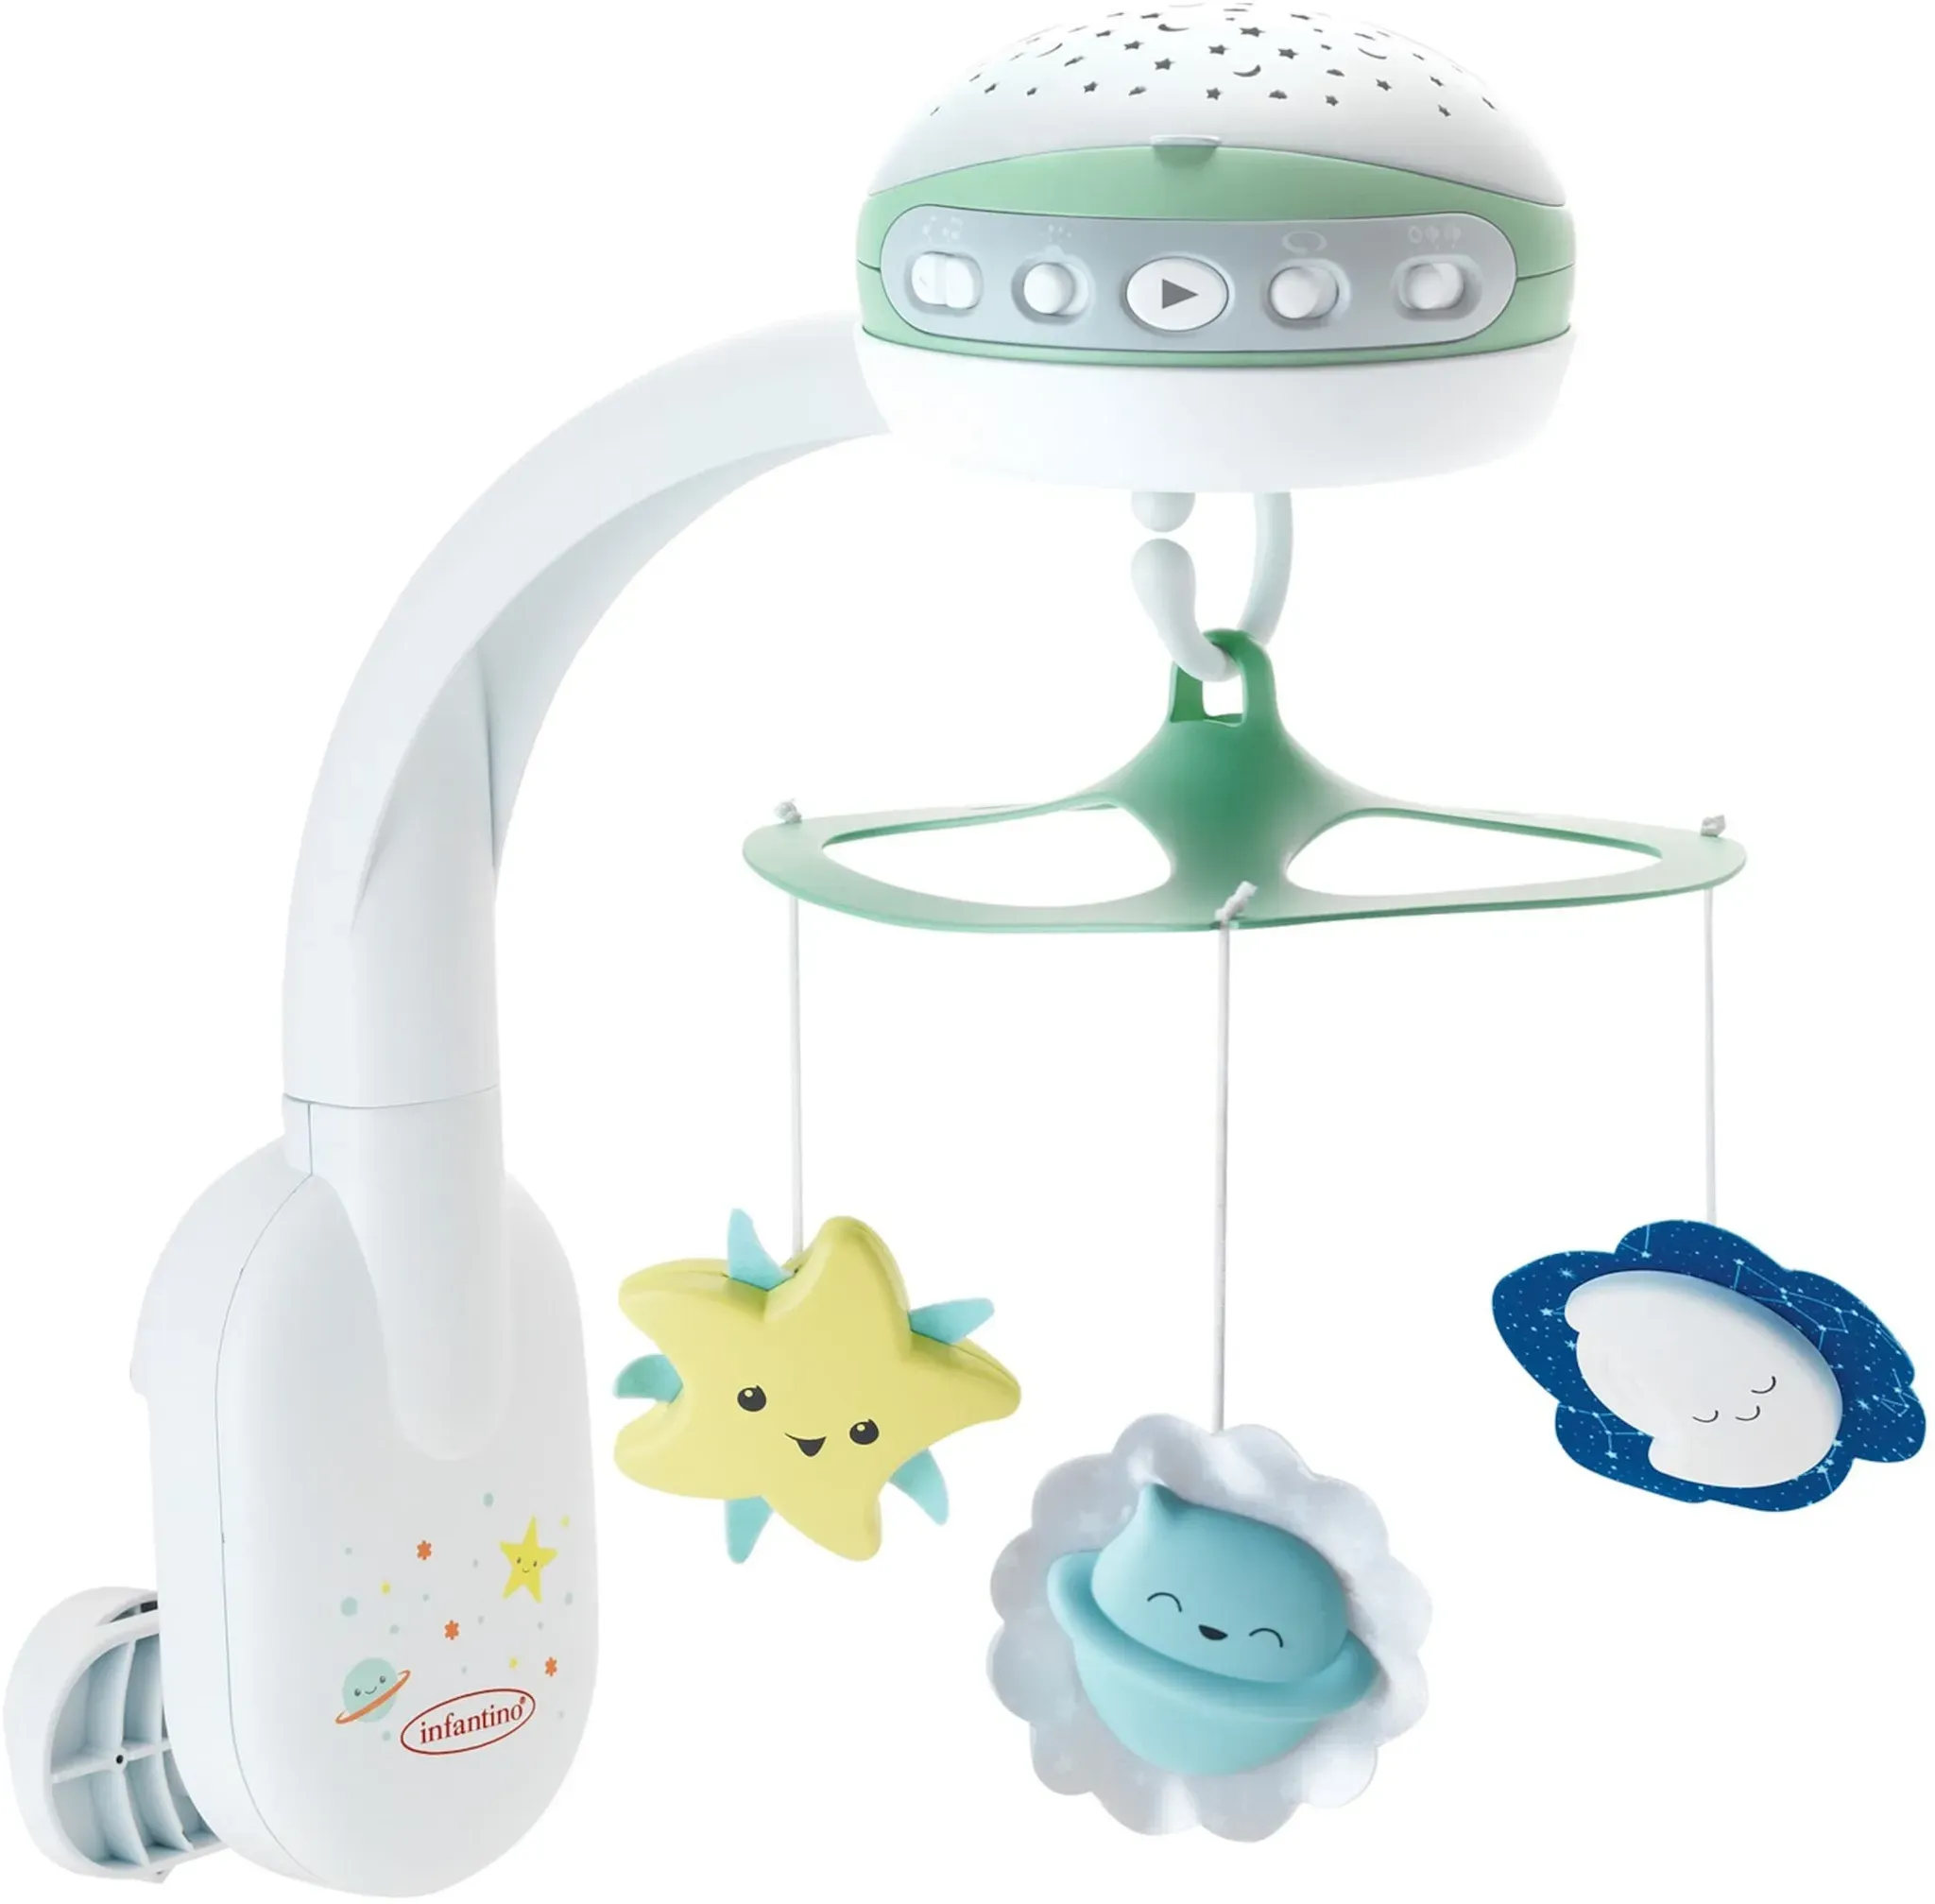 Infantino Mobile 3in1 Projektor, weiss